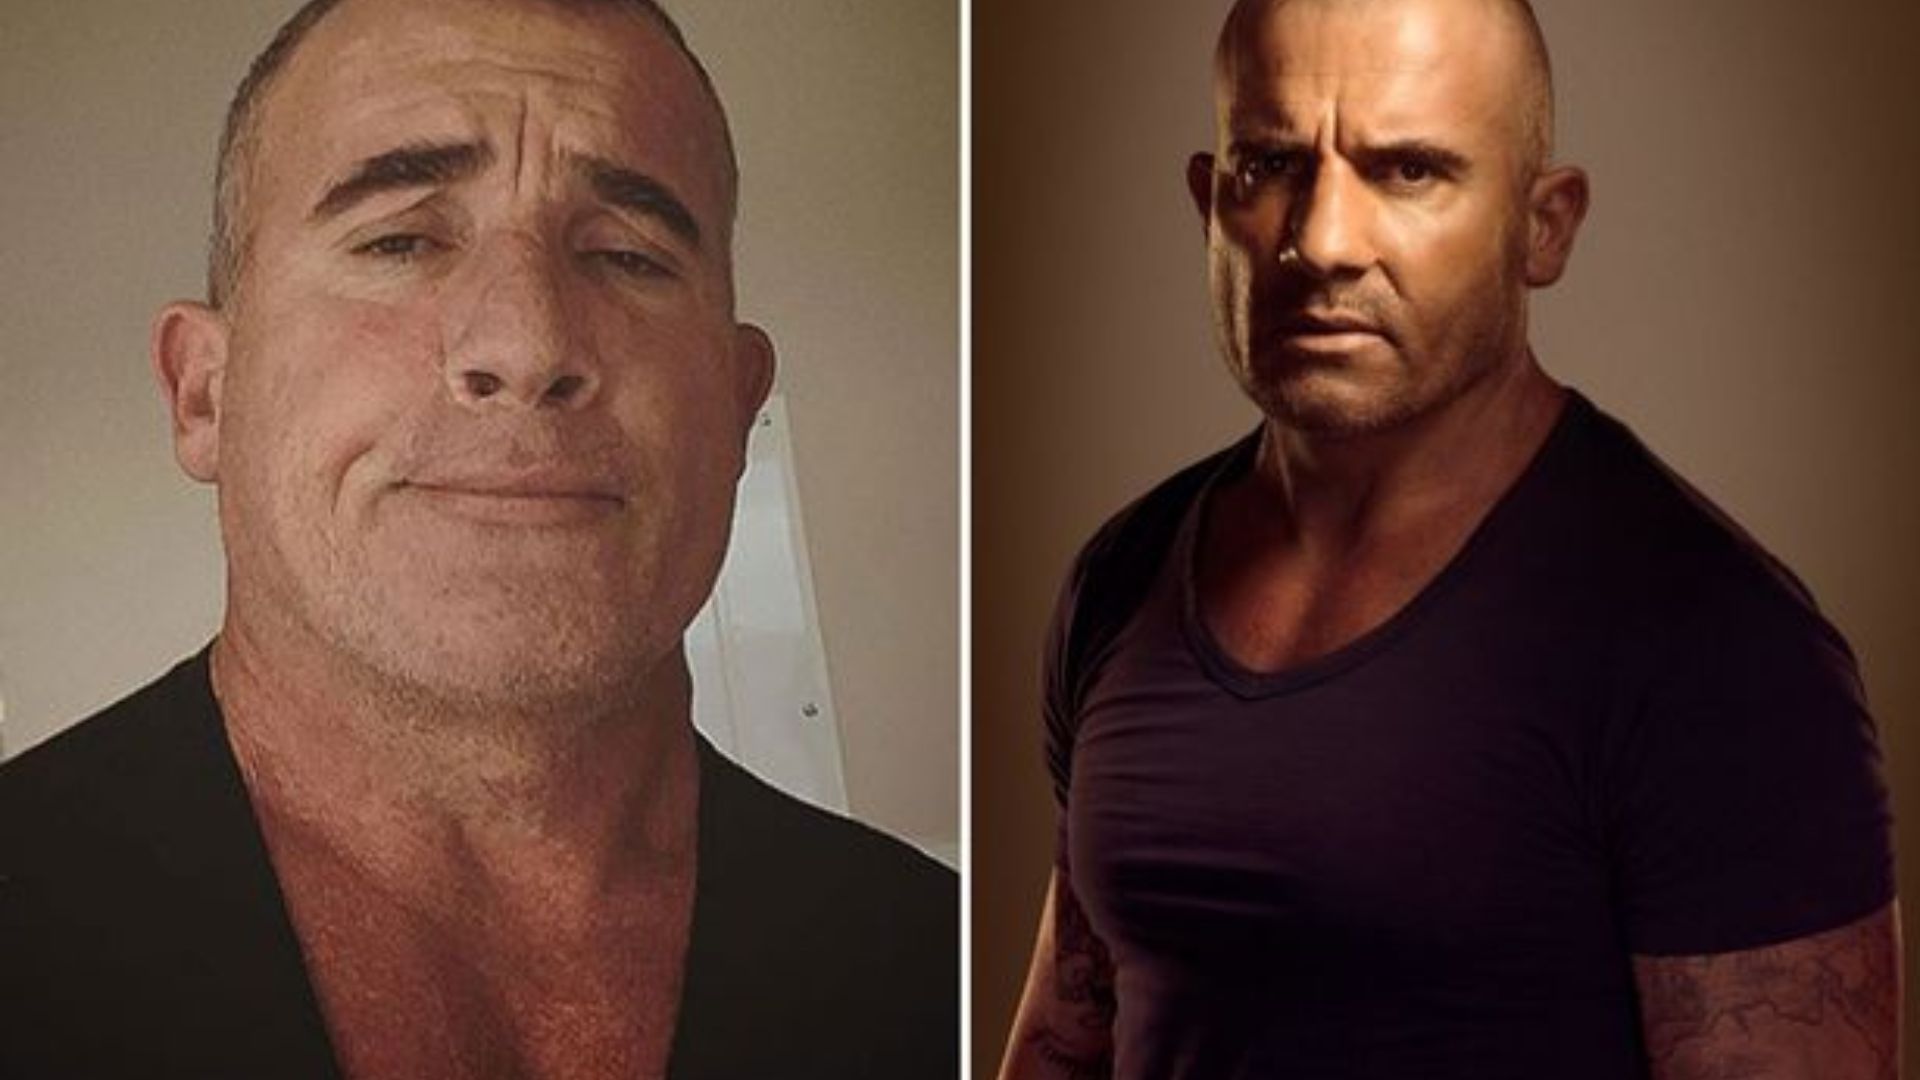 Dominic Purcell - A British-born Australian Actor Best Known For His Role As Lincoln Burrows In Prison Break